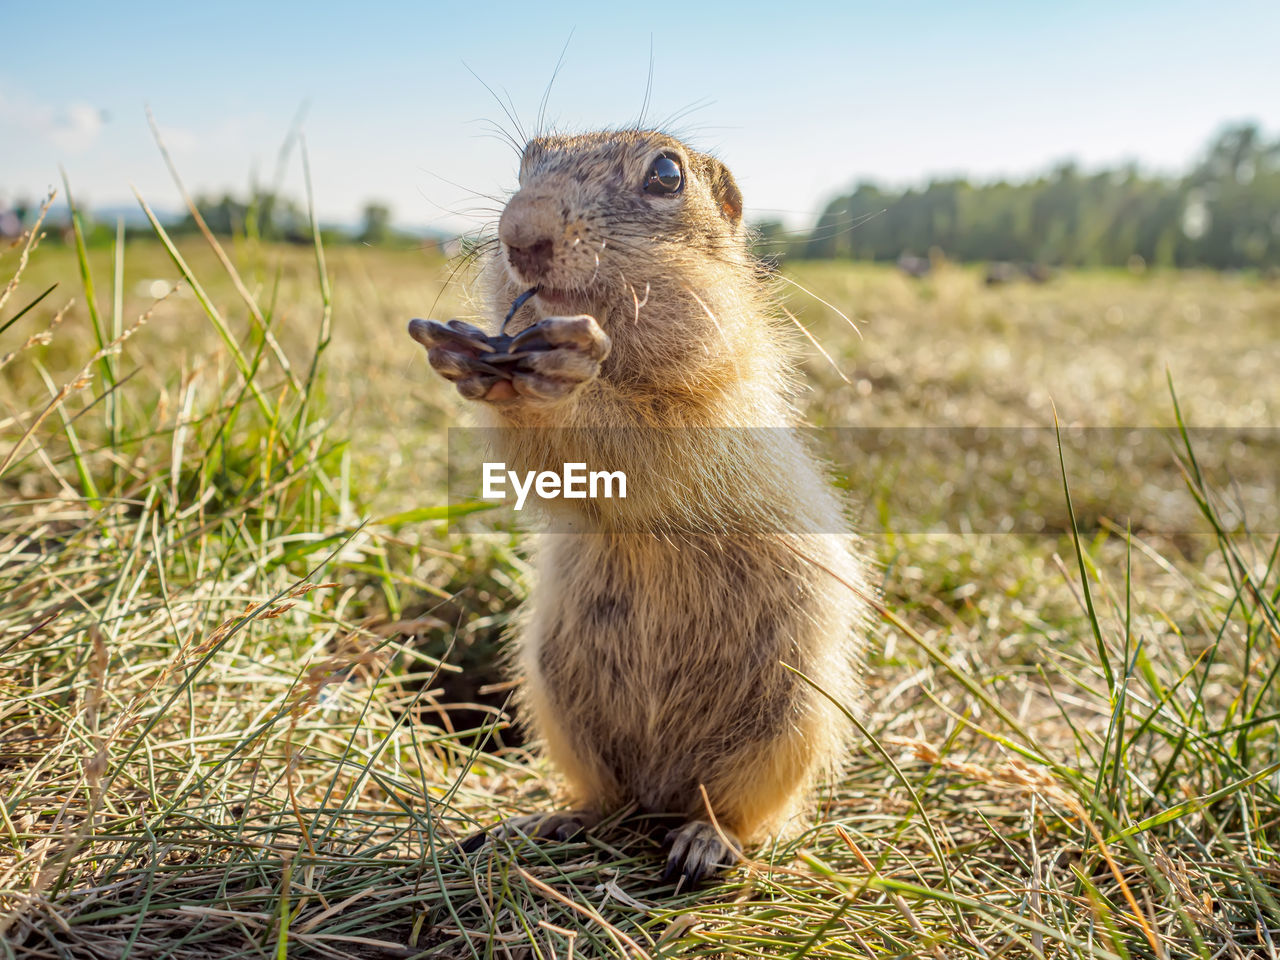 animal, animal themes, animal wildlife, mammal, wildlife, one animal, prairie dog, nature, grass, squirrel, no people, plant, rodent, sky, prairie, outdoors, day, eating, focus on foreground, portrait, animal body part, cute, close-up, land, looking, whiskers